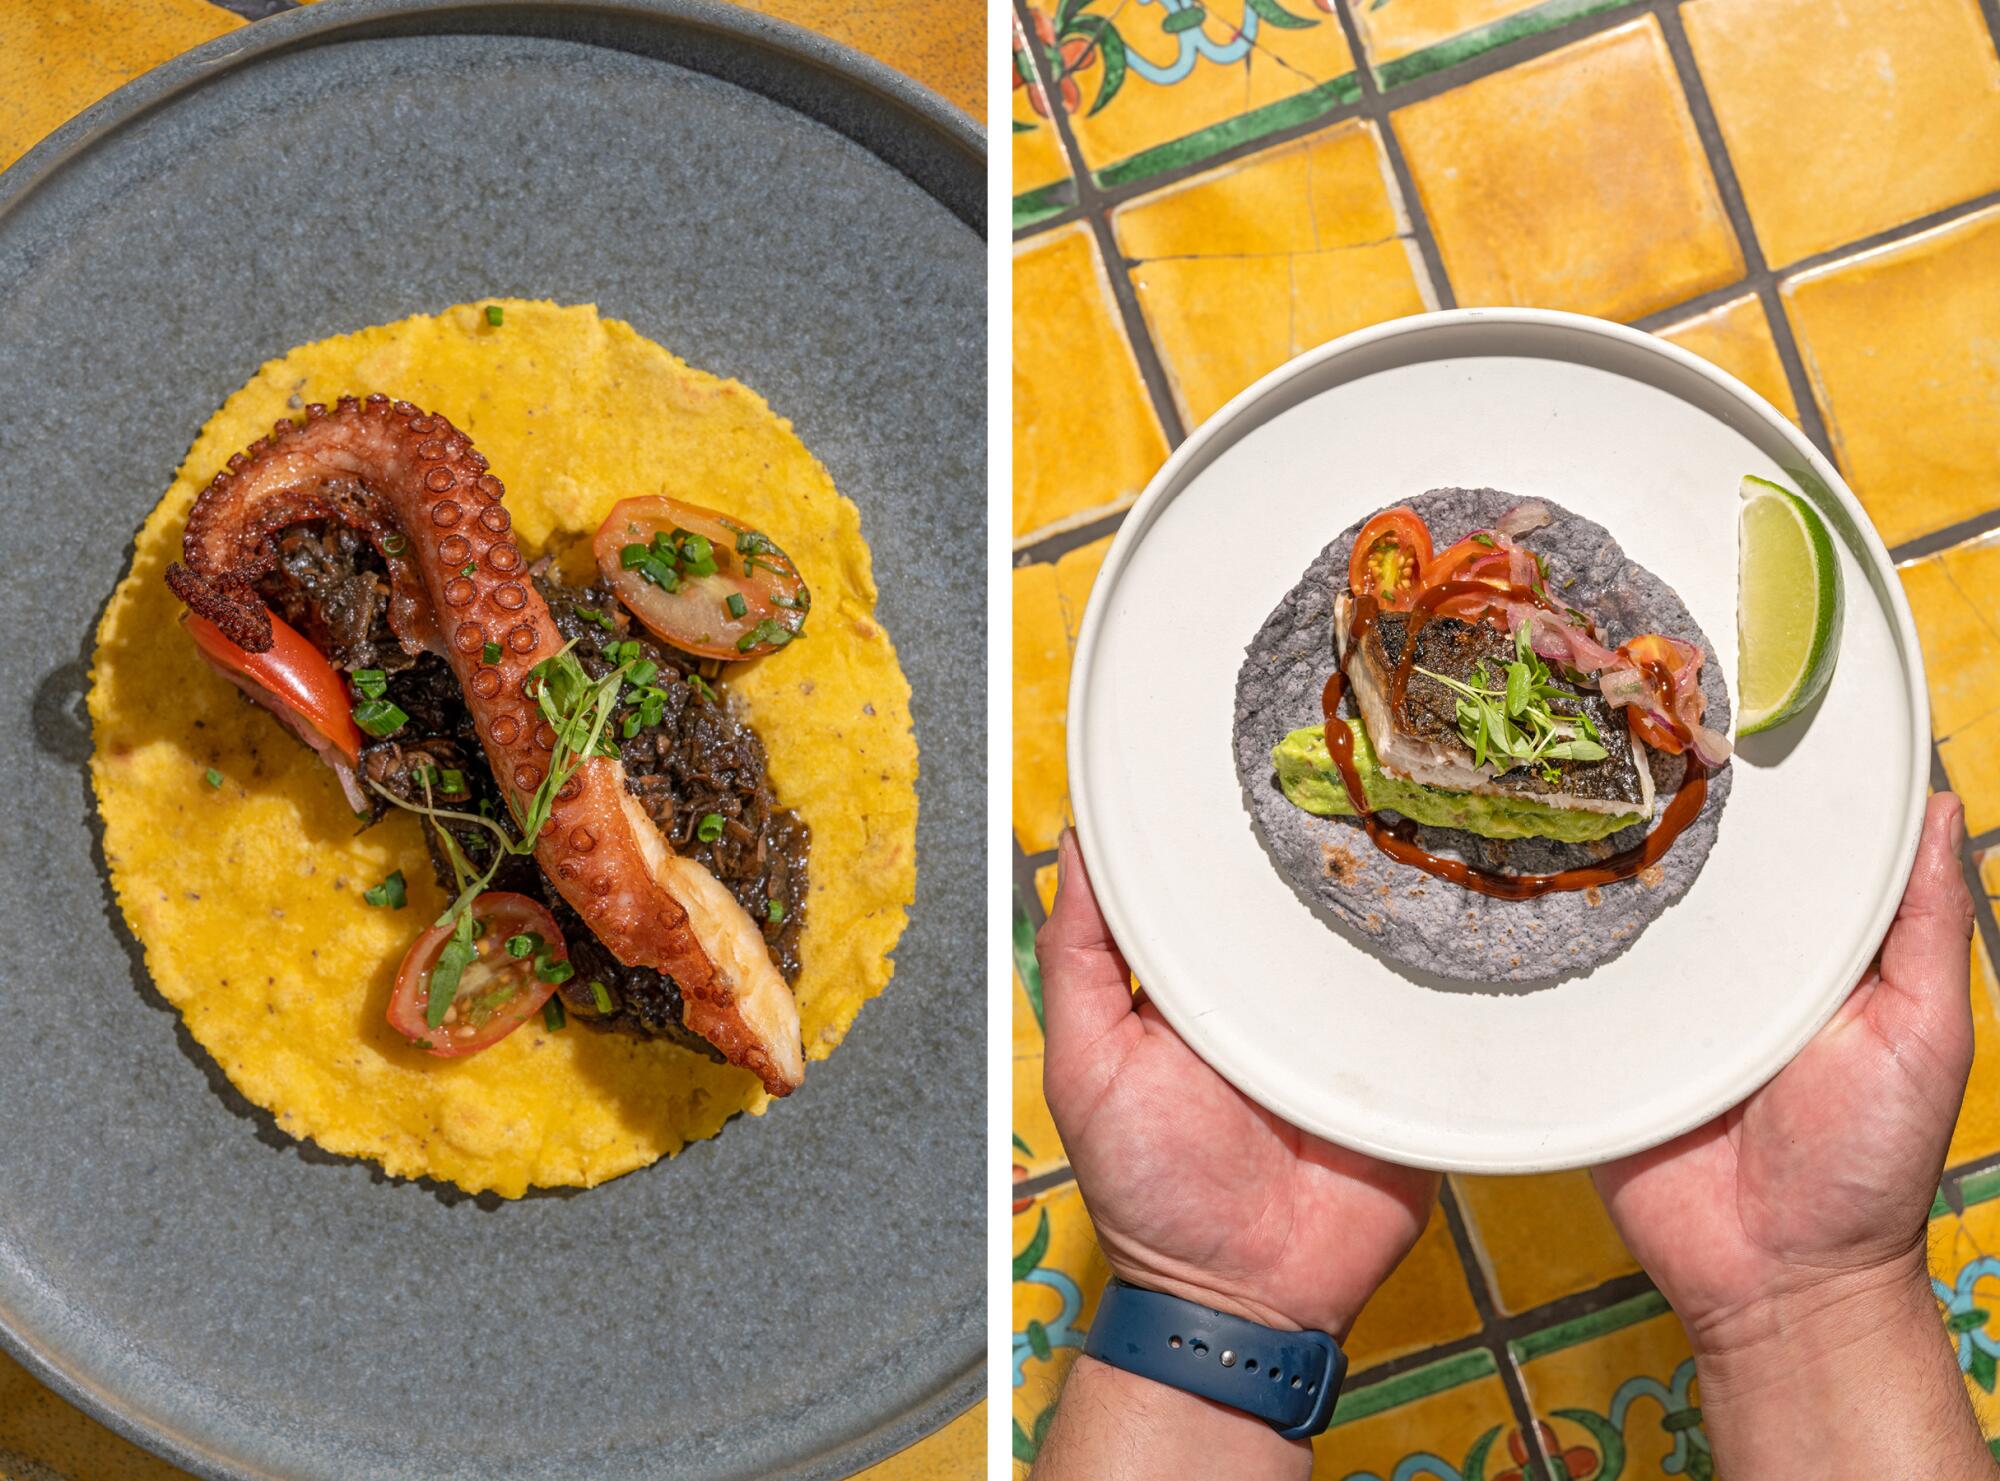 Holbox's octopus taco with a squid-ink sofrito, left, and mesquite-grilled fish taco, right.